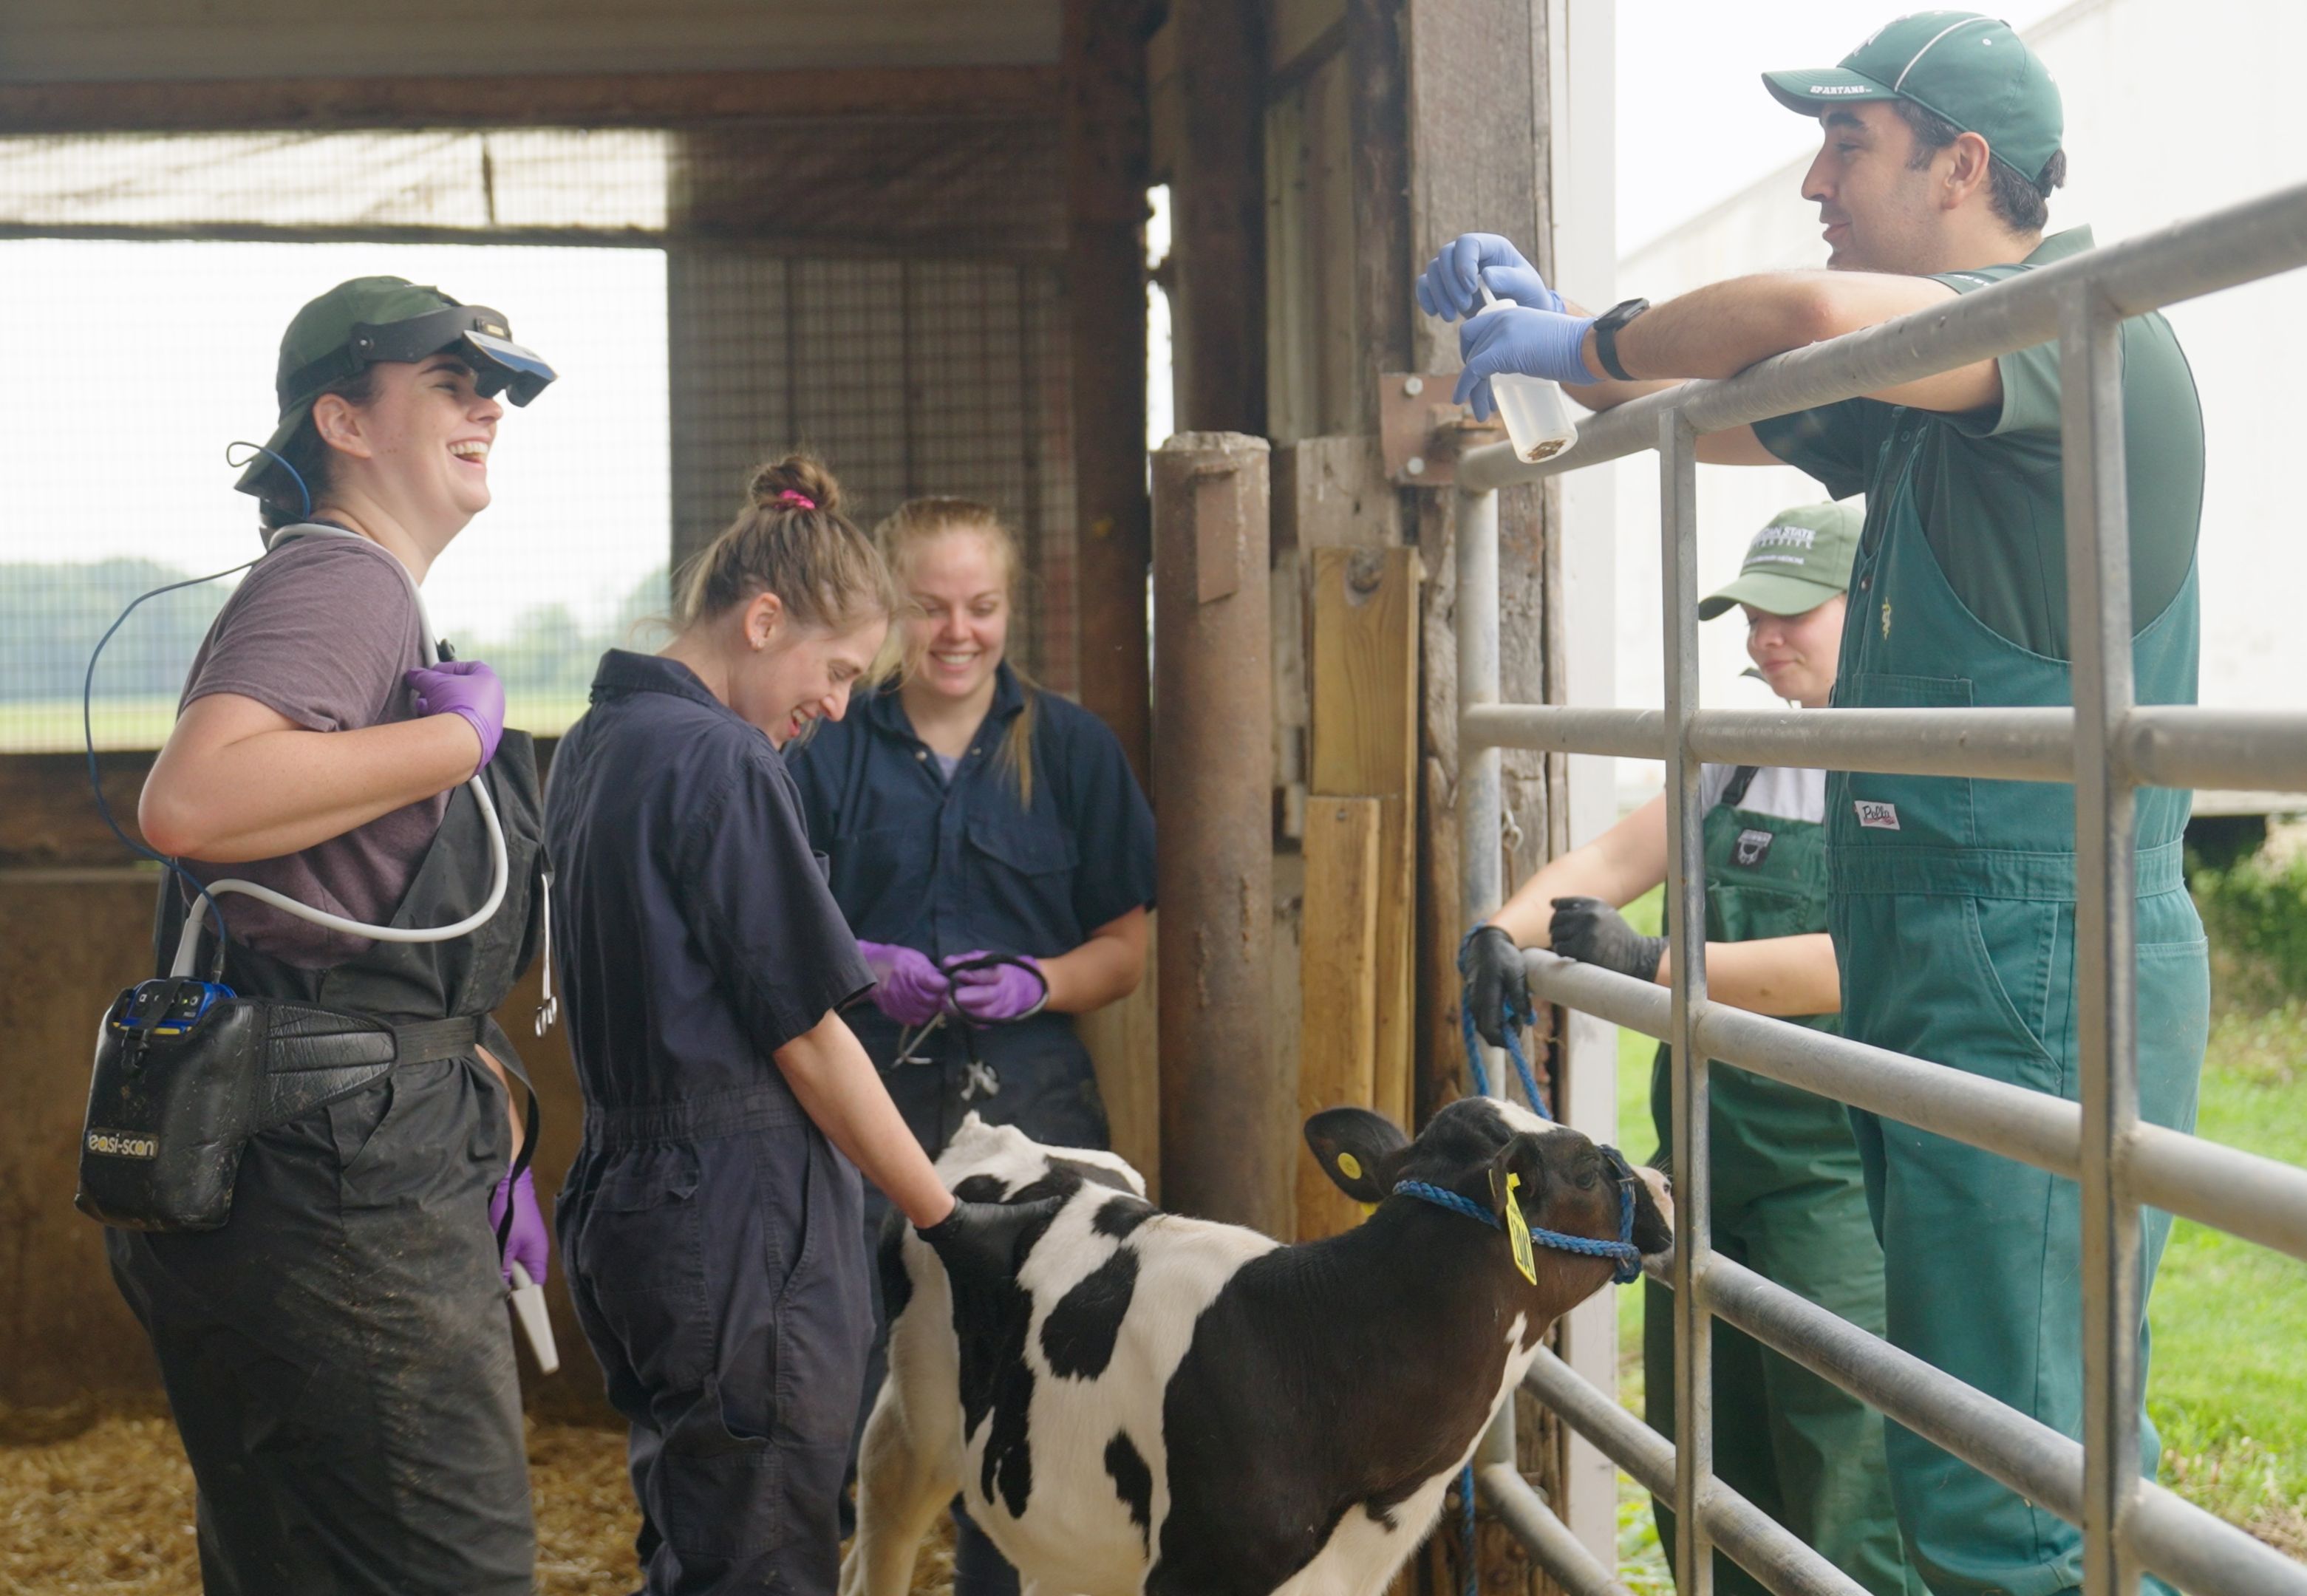 Ángel Abuelo works with final-year veterinary students completing an advanced dairy production medicine clinical rotation at Car-Min-Vu Farm in Webberville. The students are performing a thoracic lung ultrasound to evaluate the presence of subclinical respiratory disease in calves.